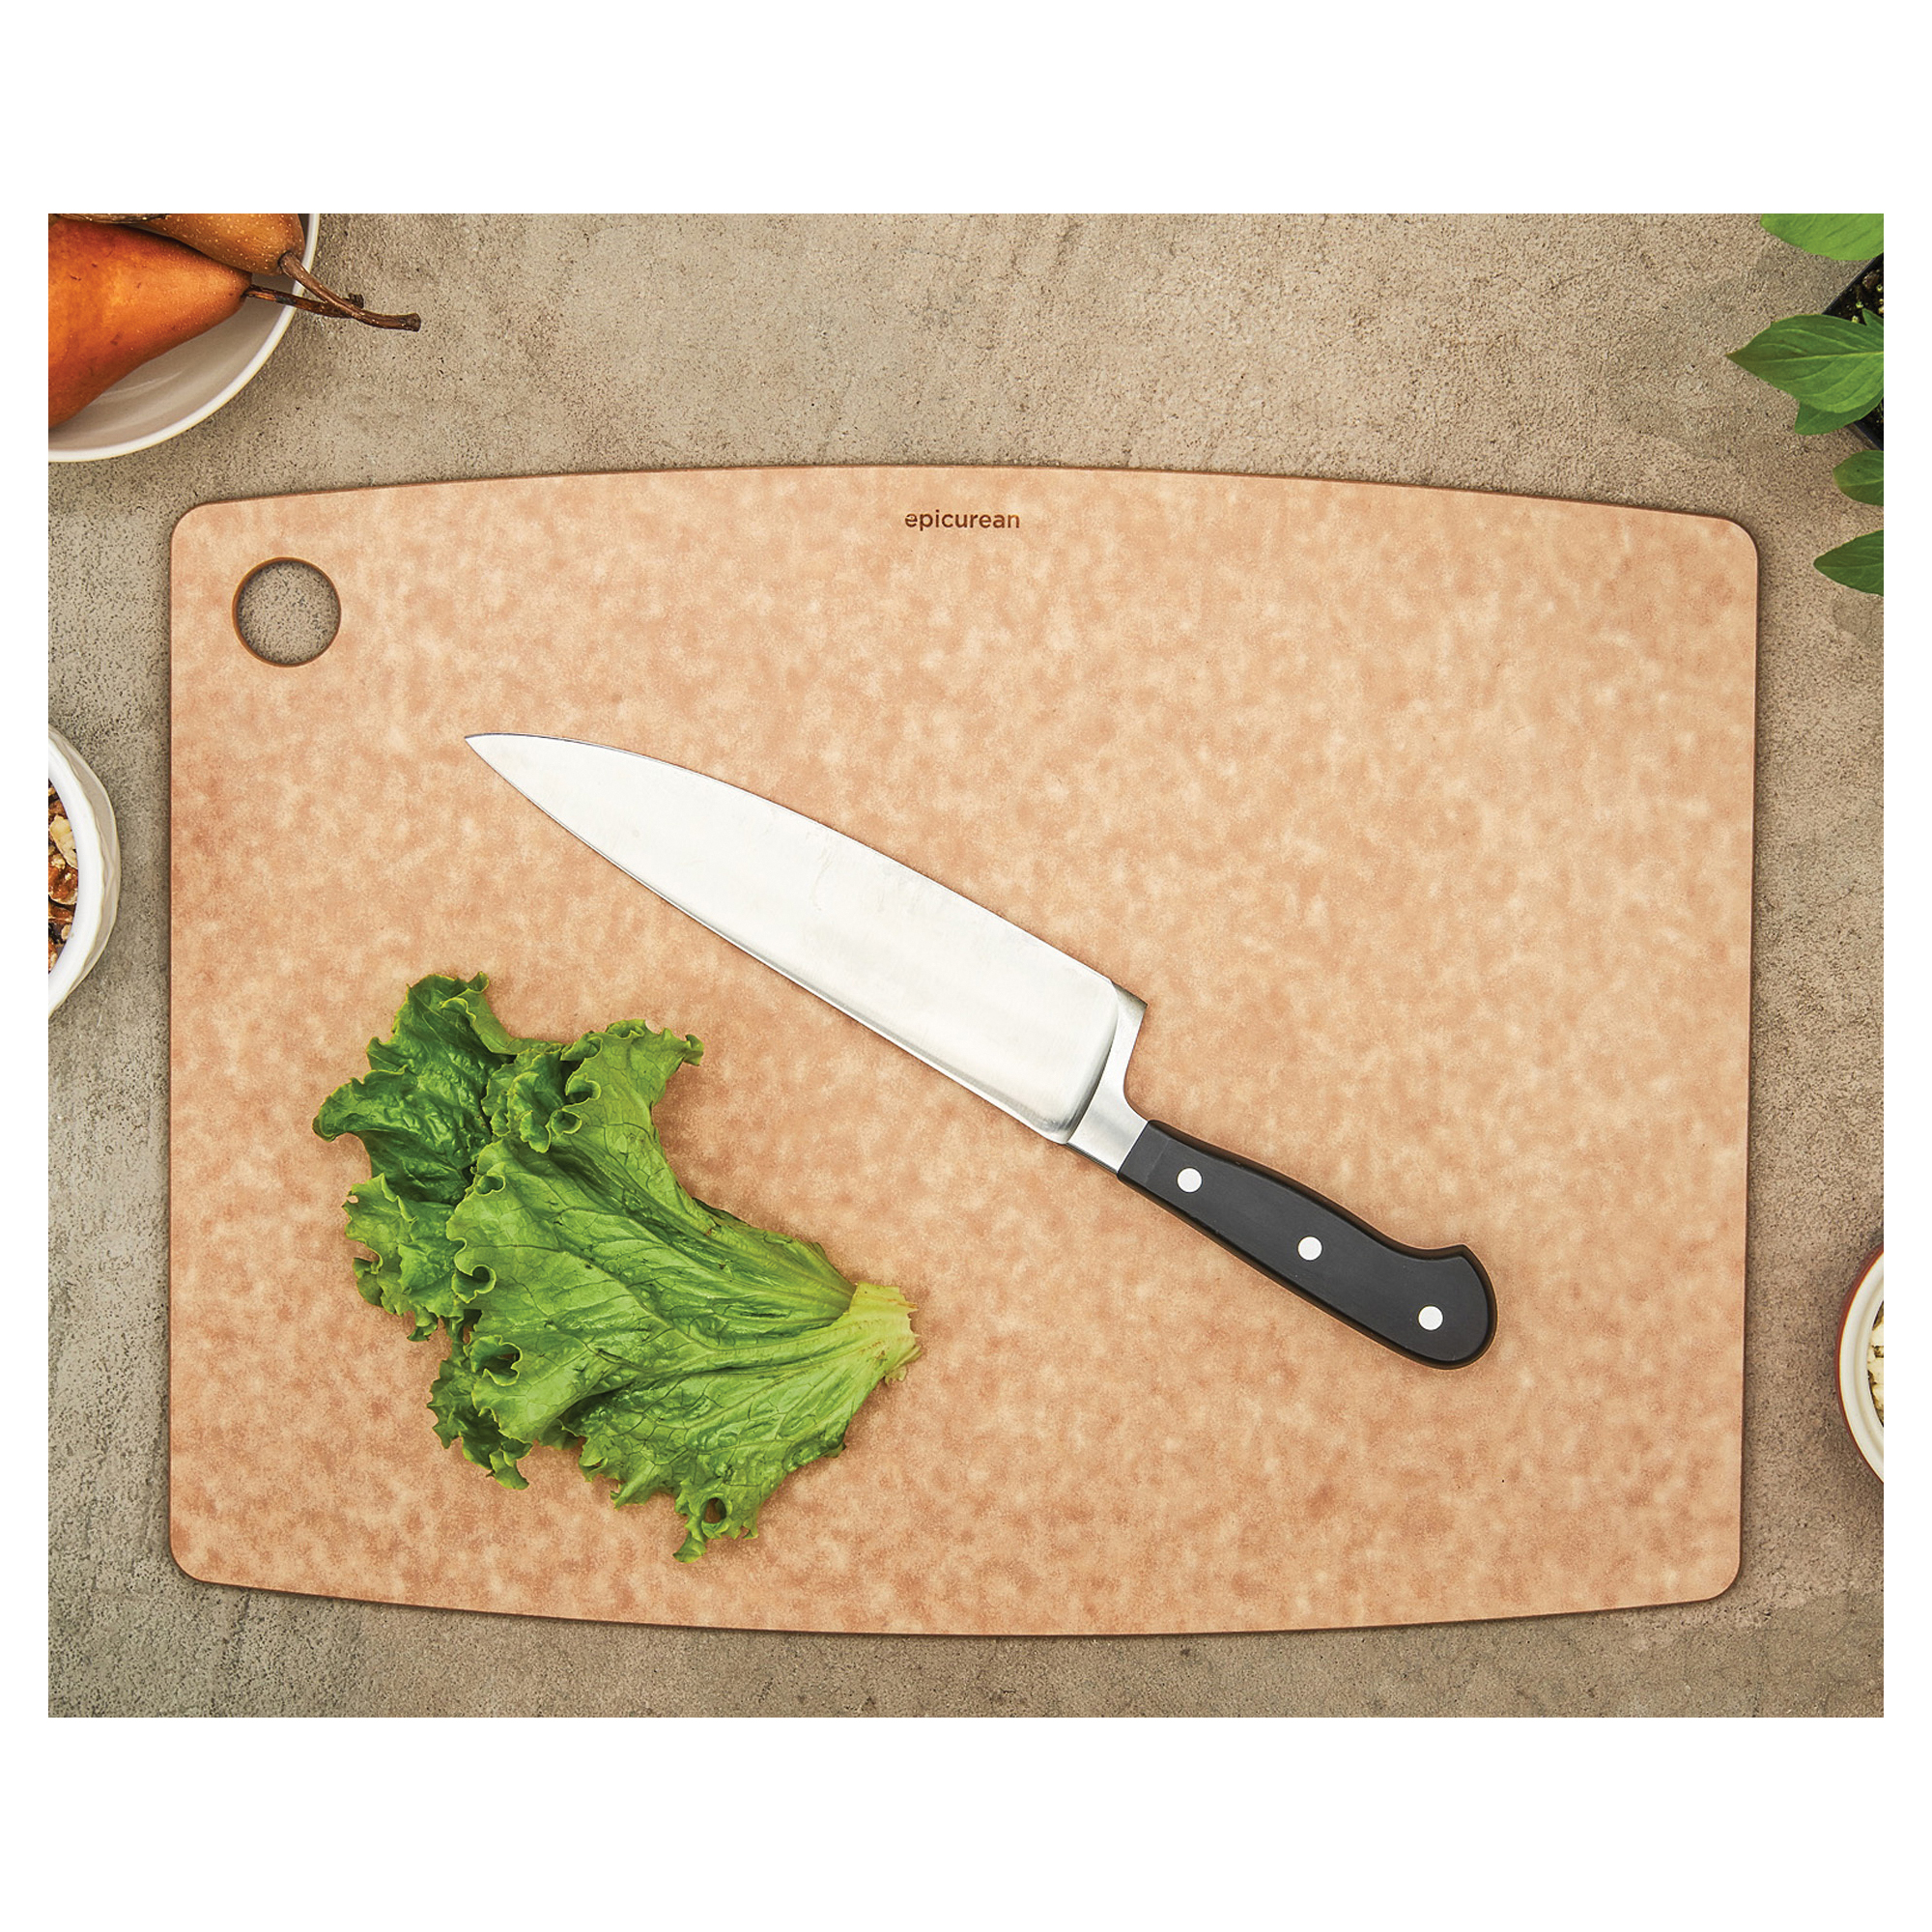 epicurean Kitchen Series 001-181301 Cutting Board, 17-1/2 in L, 13 in W, 1/4 in Thick, Wood, Natural - 5